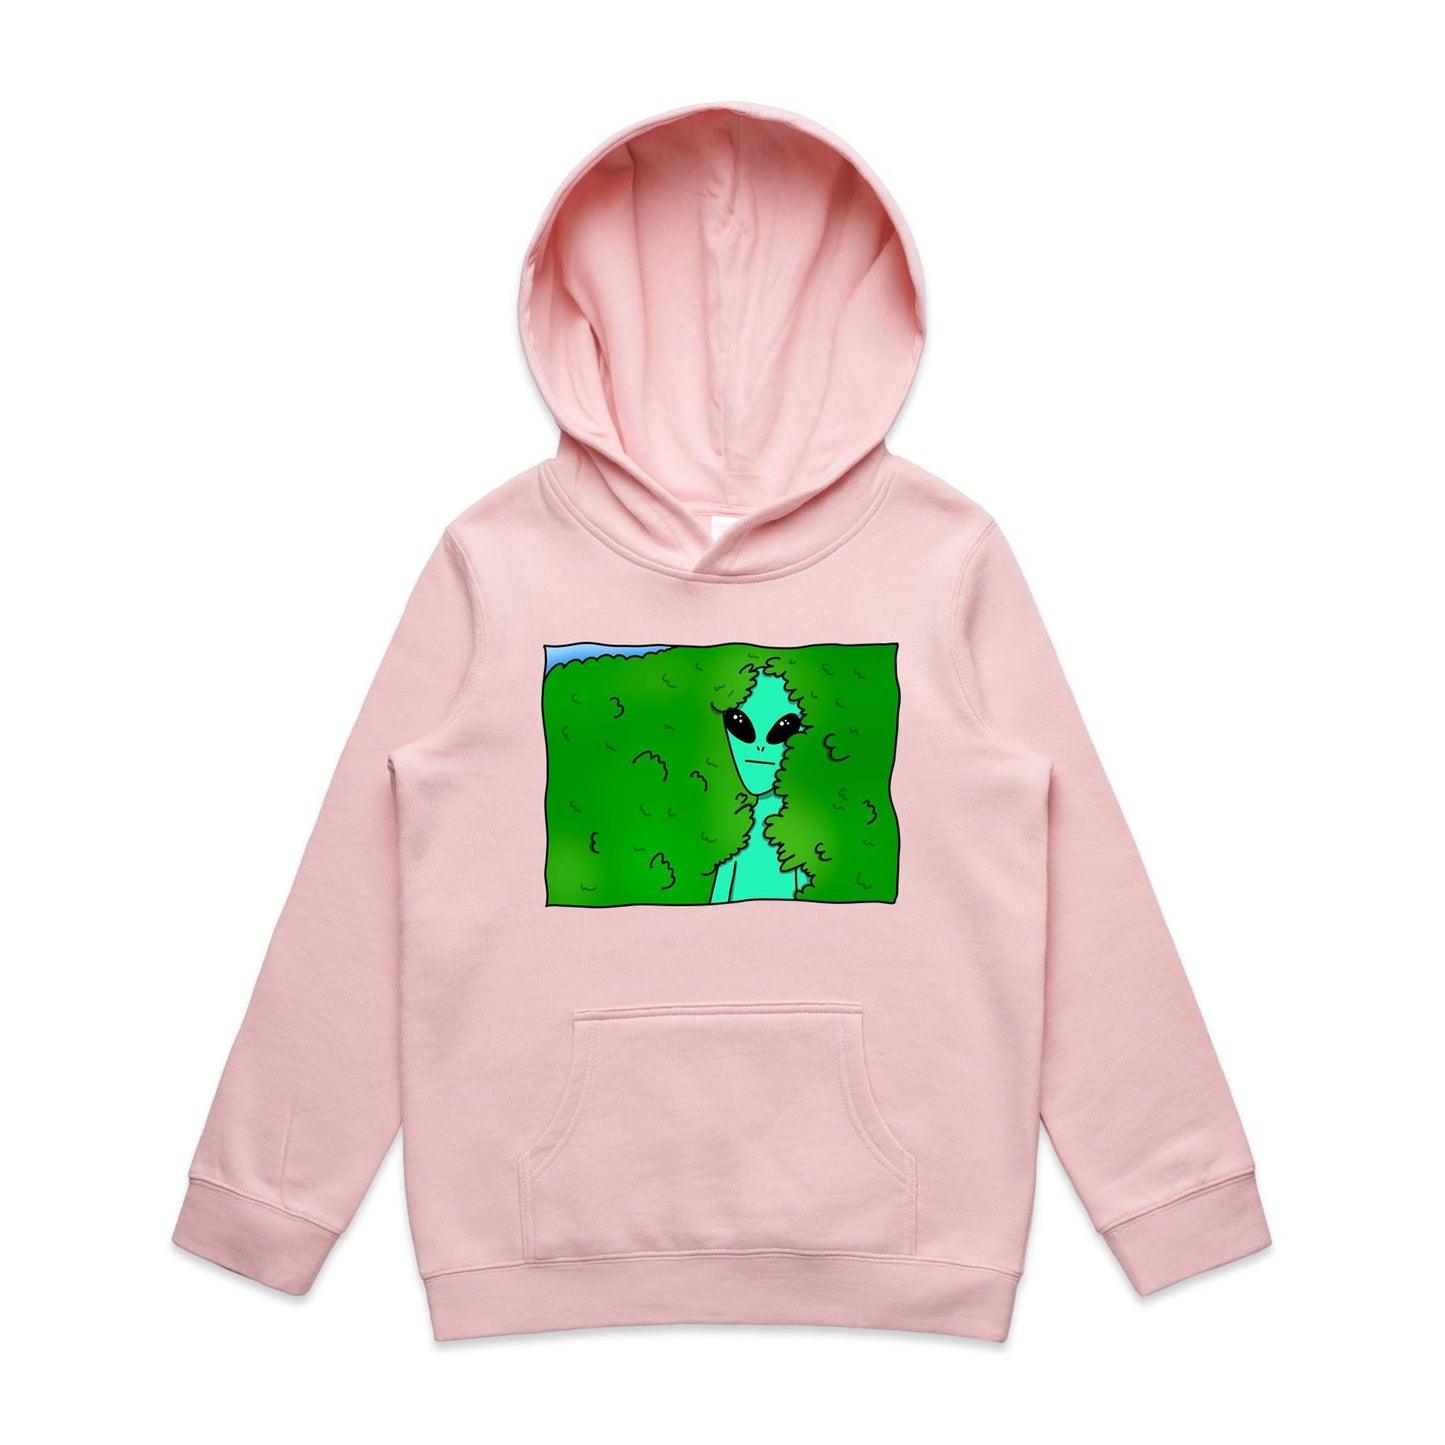 Alien Backing Into Hedge Meme - Youth Supply Hood Pink Kids Hoodie Funny Sci Fi